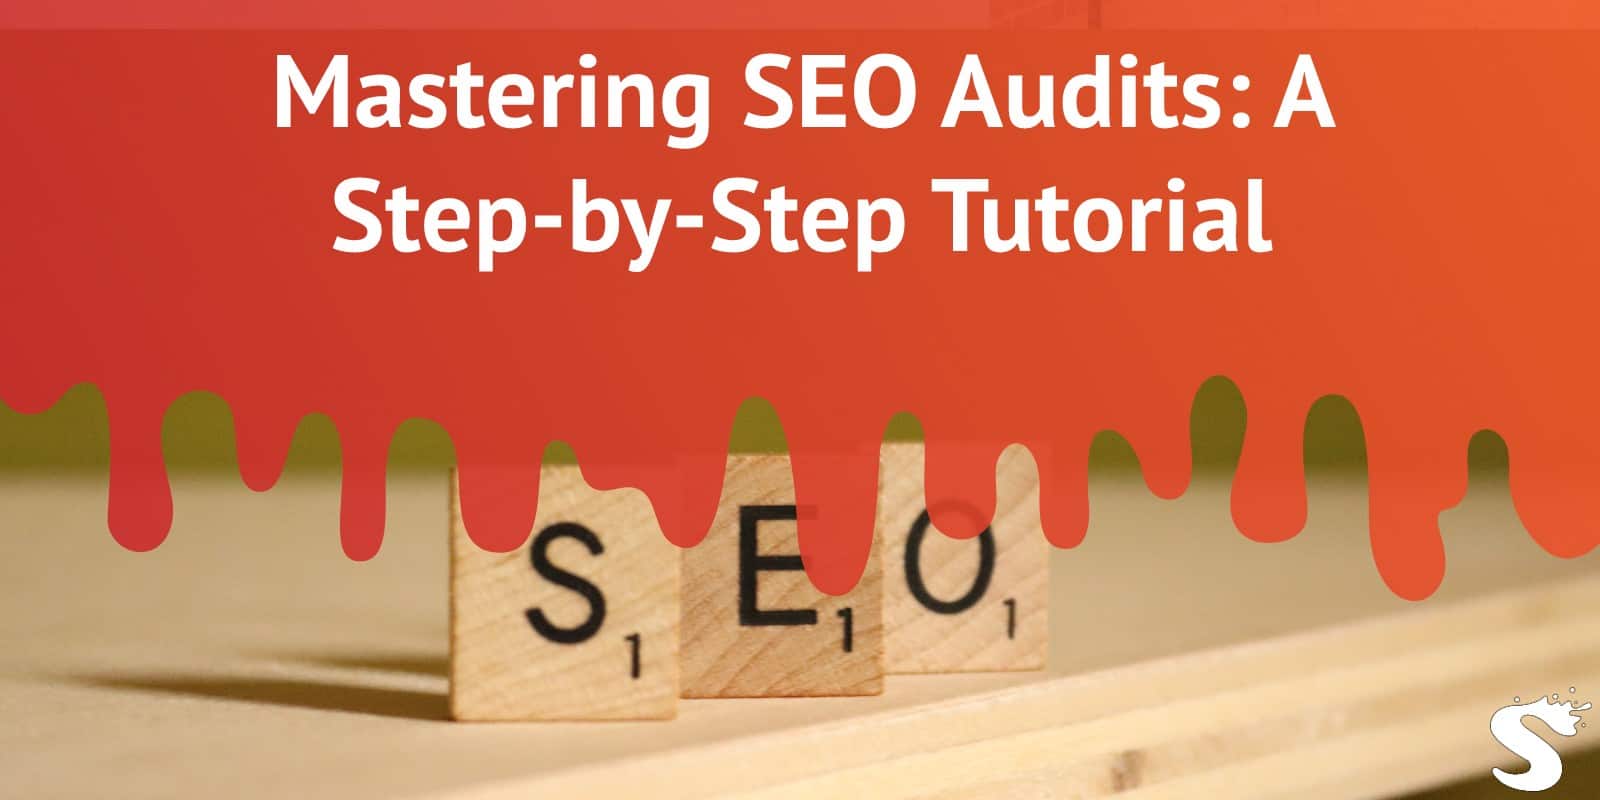 Mastering SEO Audits: A Step-by-Step Tutorial